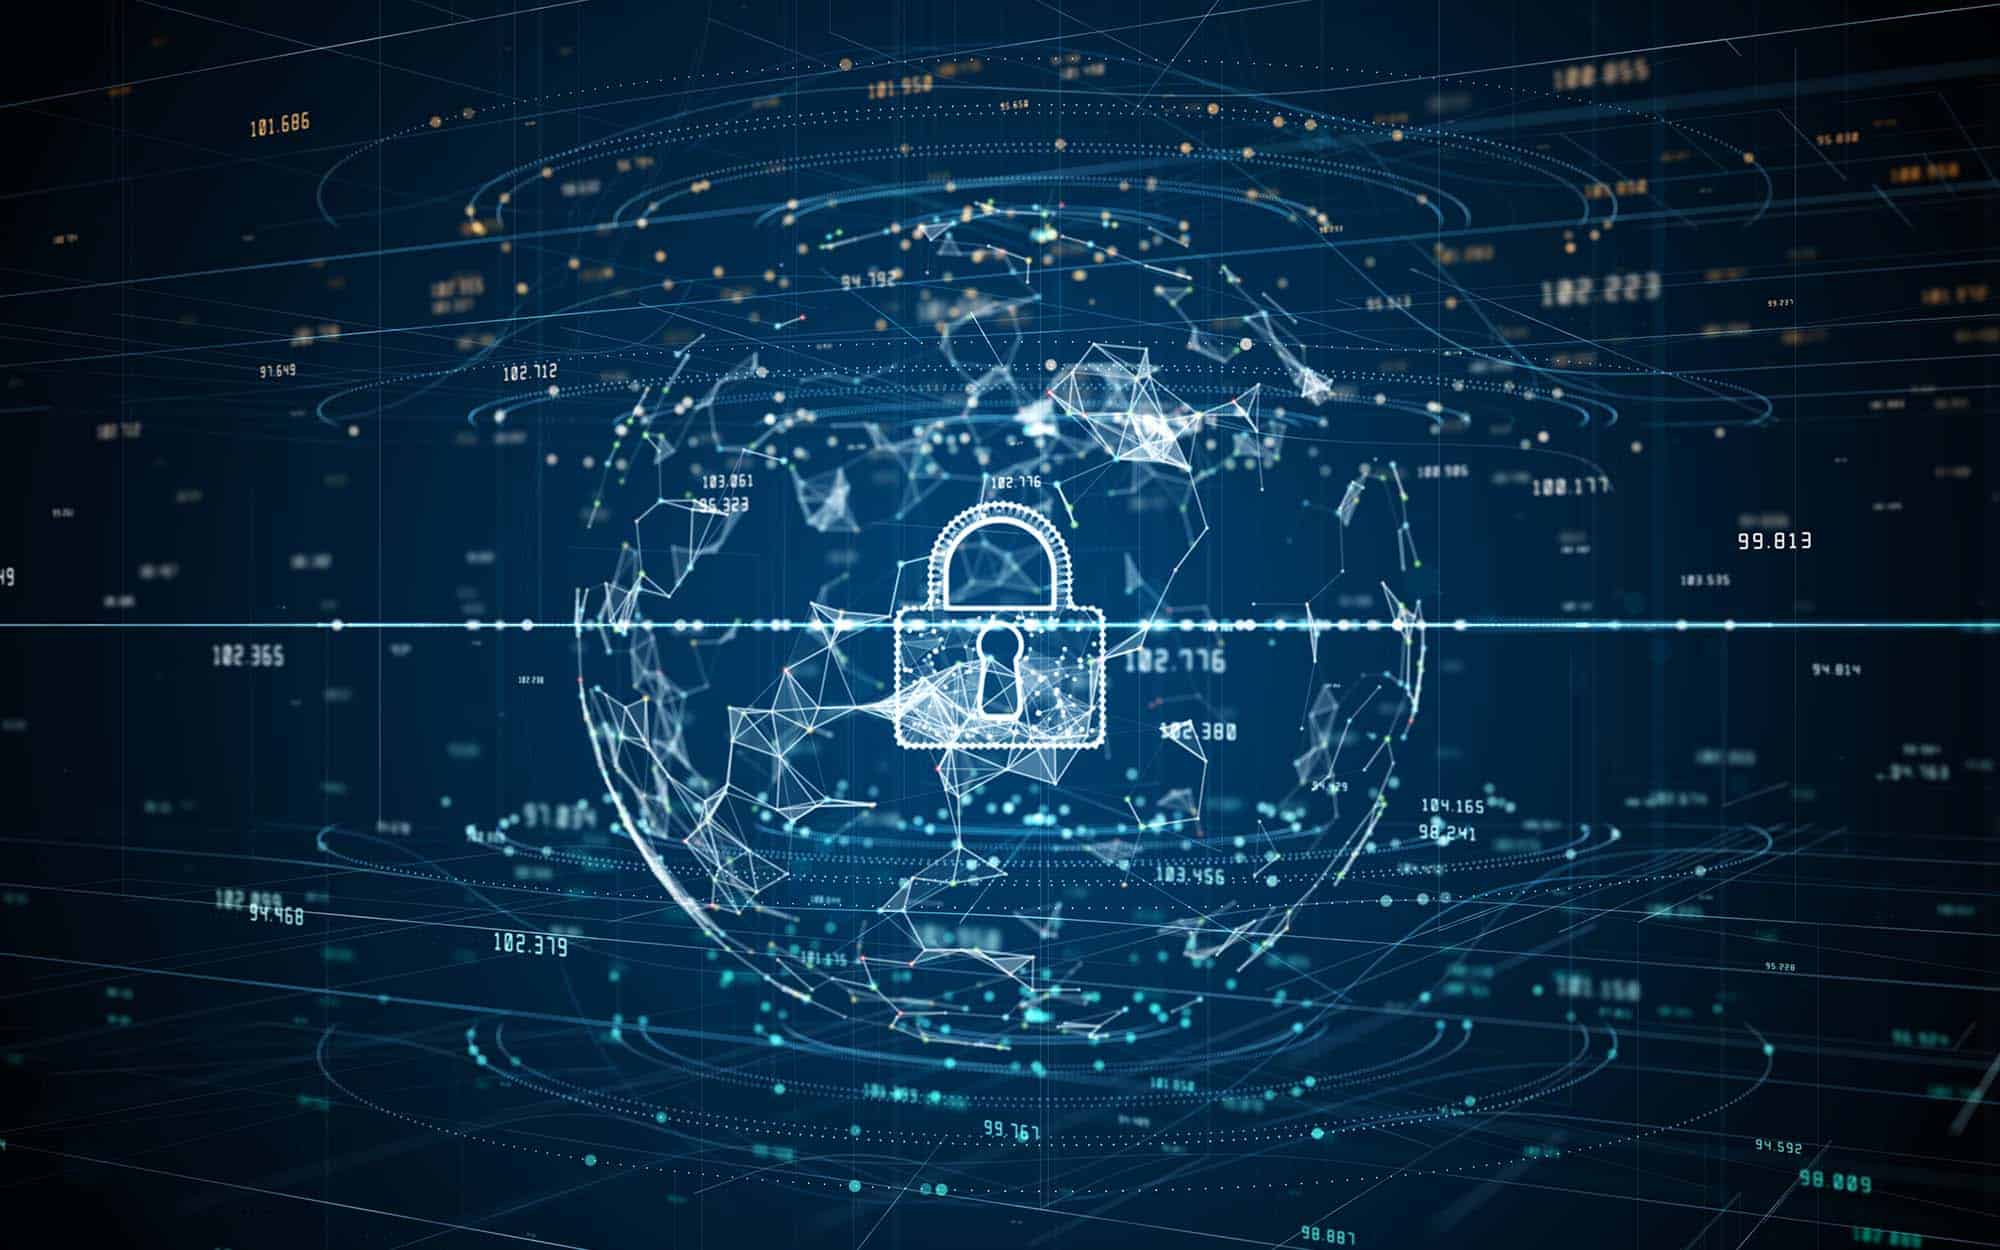 Lock Icon of Cyber Security Digital Data, Digital Data Network Protection, Global Network 5g High-Speed Internet Connection and Big Data AnalysiS